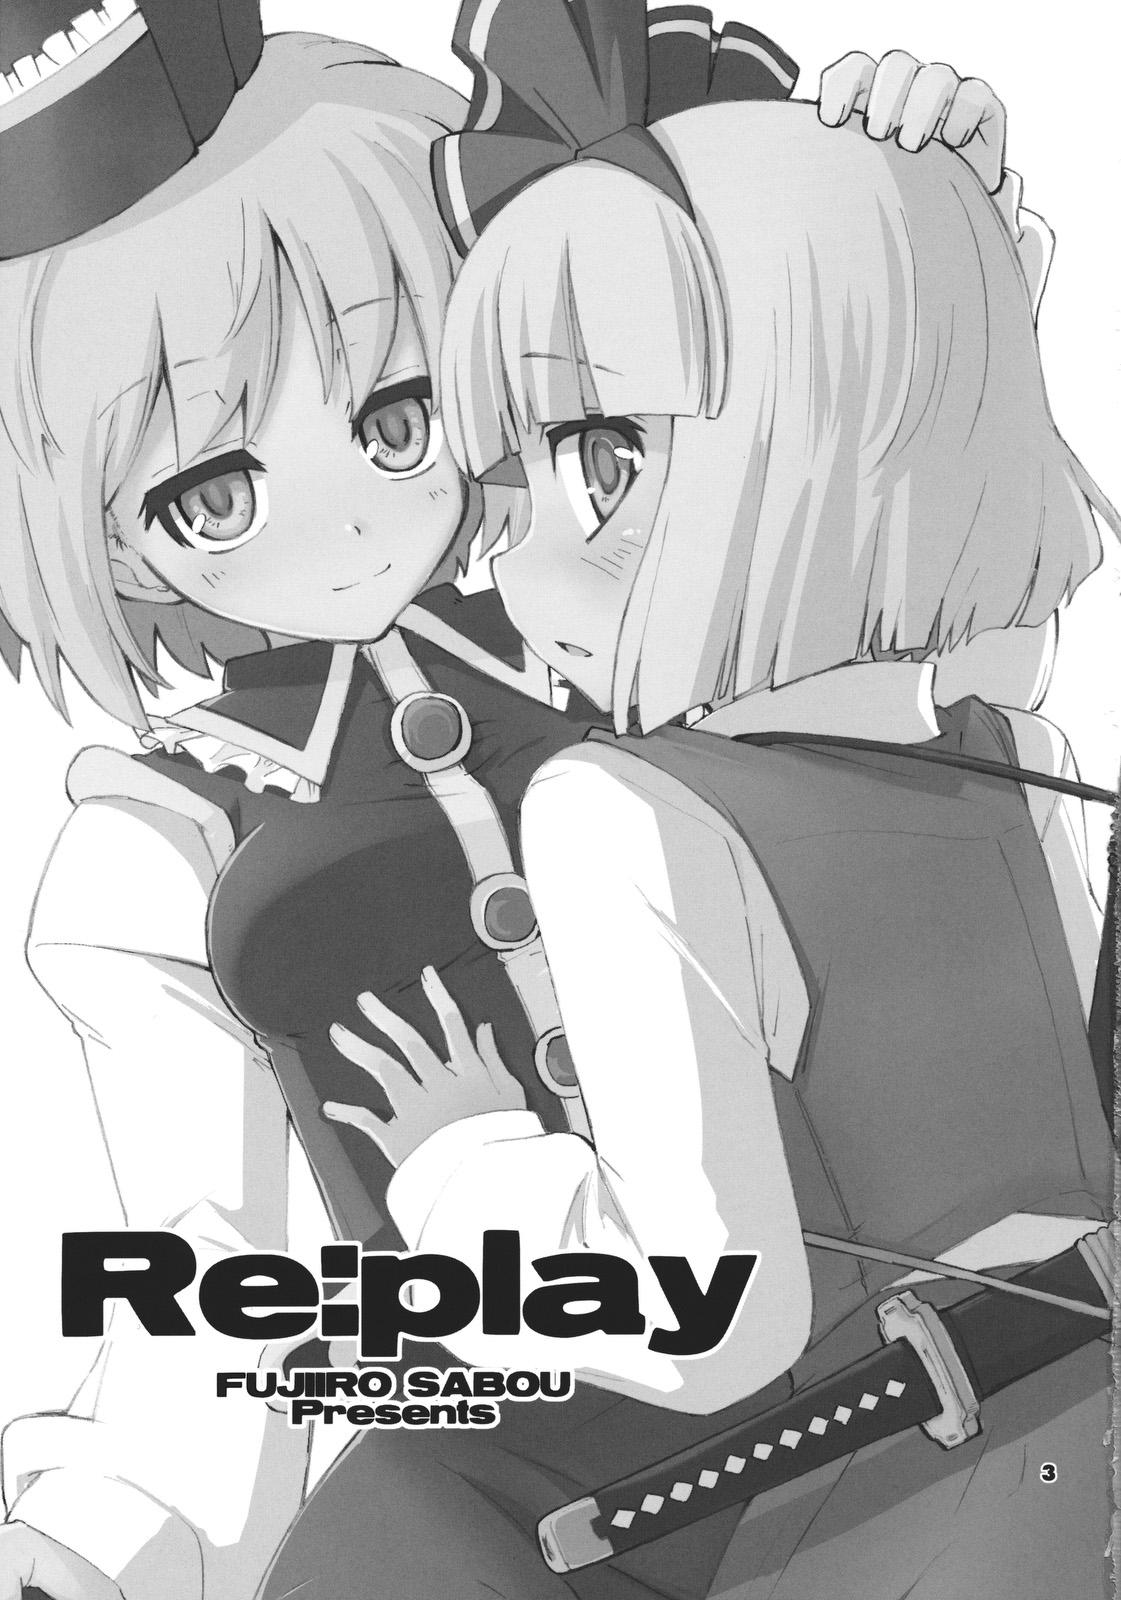 Re:play 2